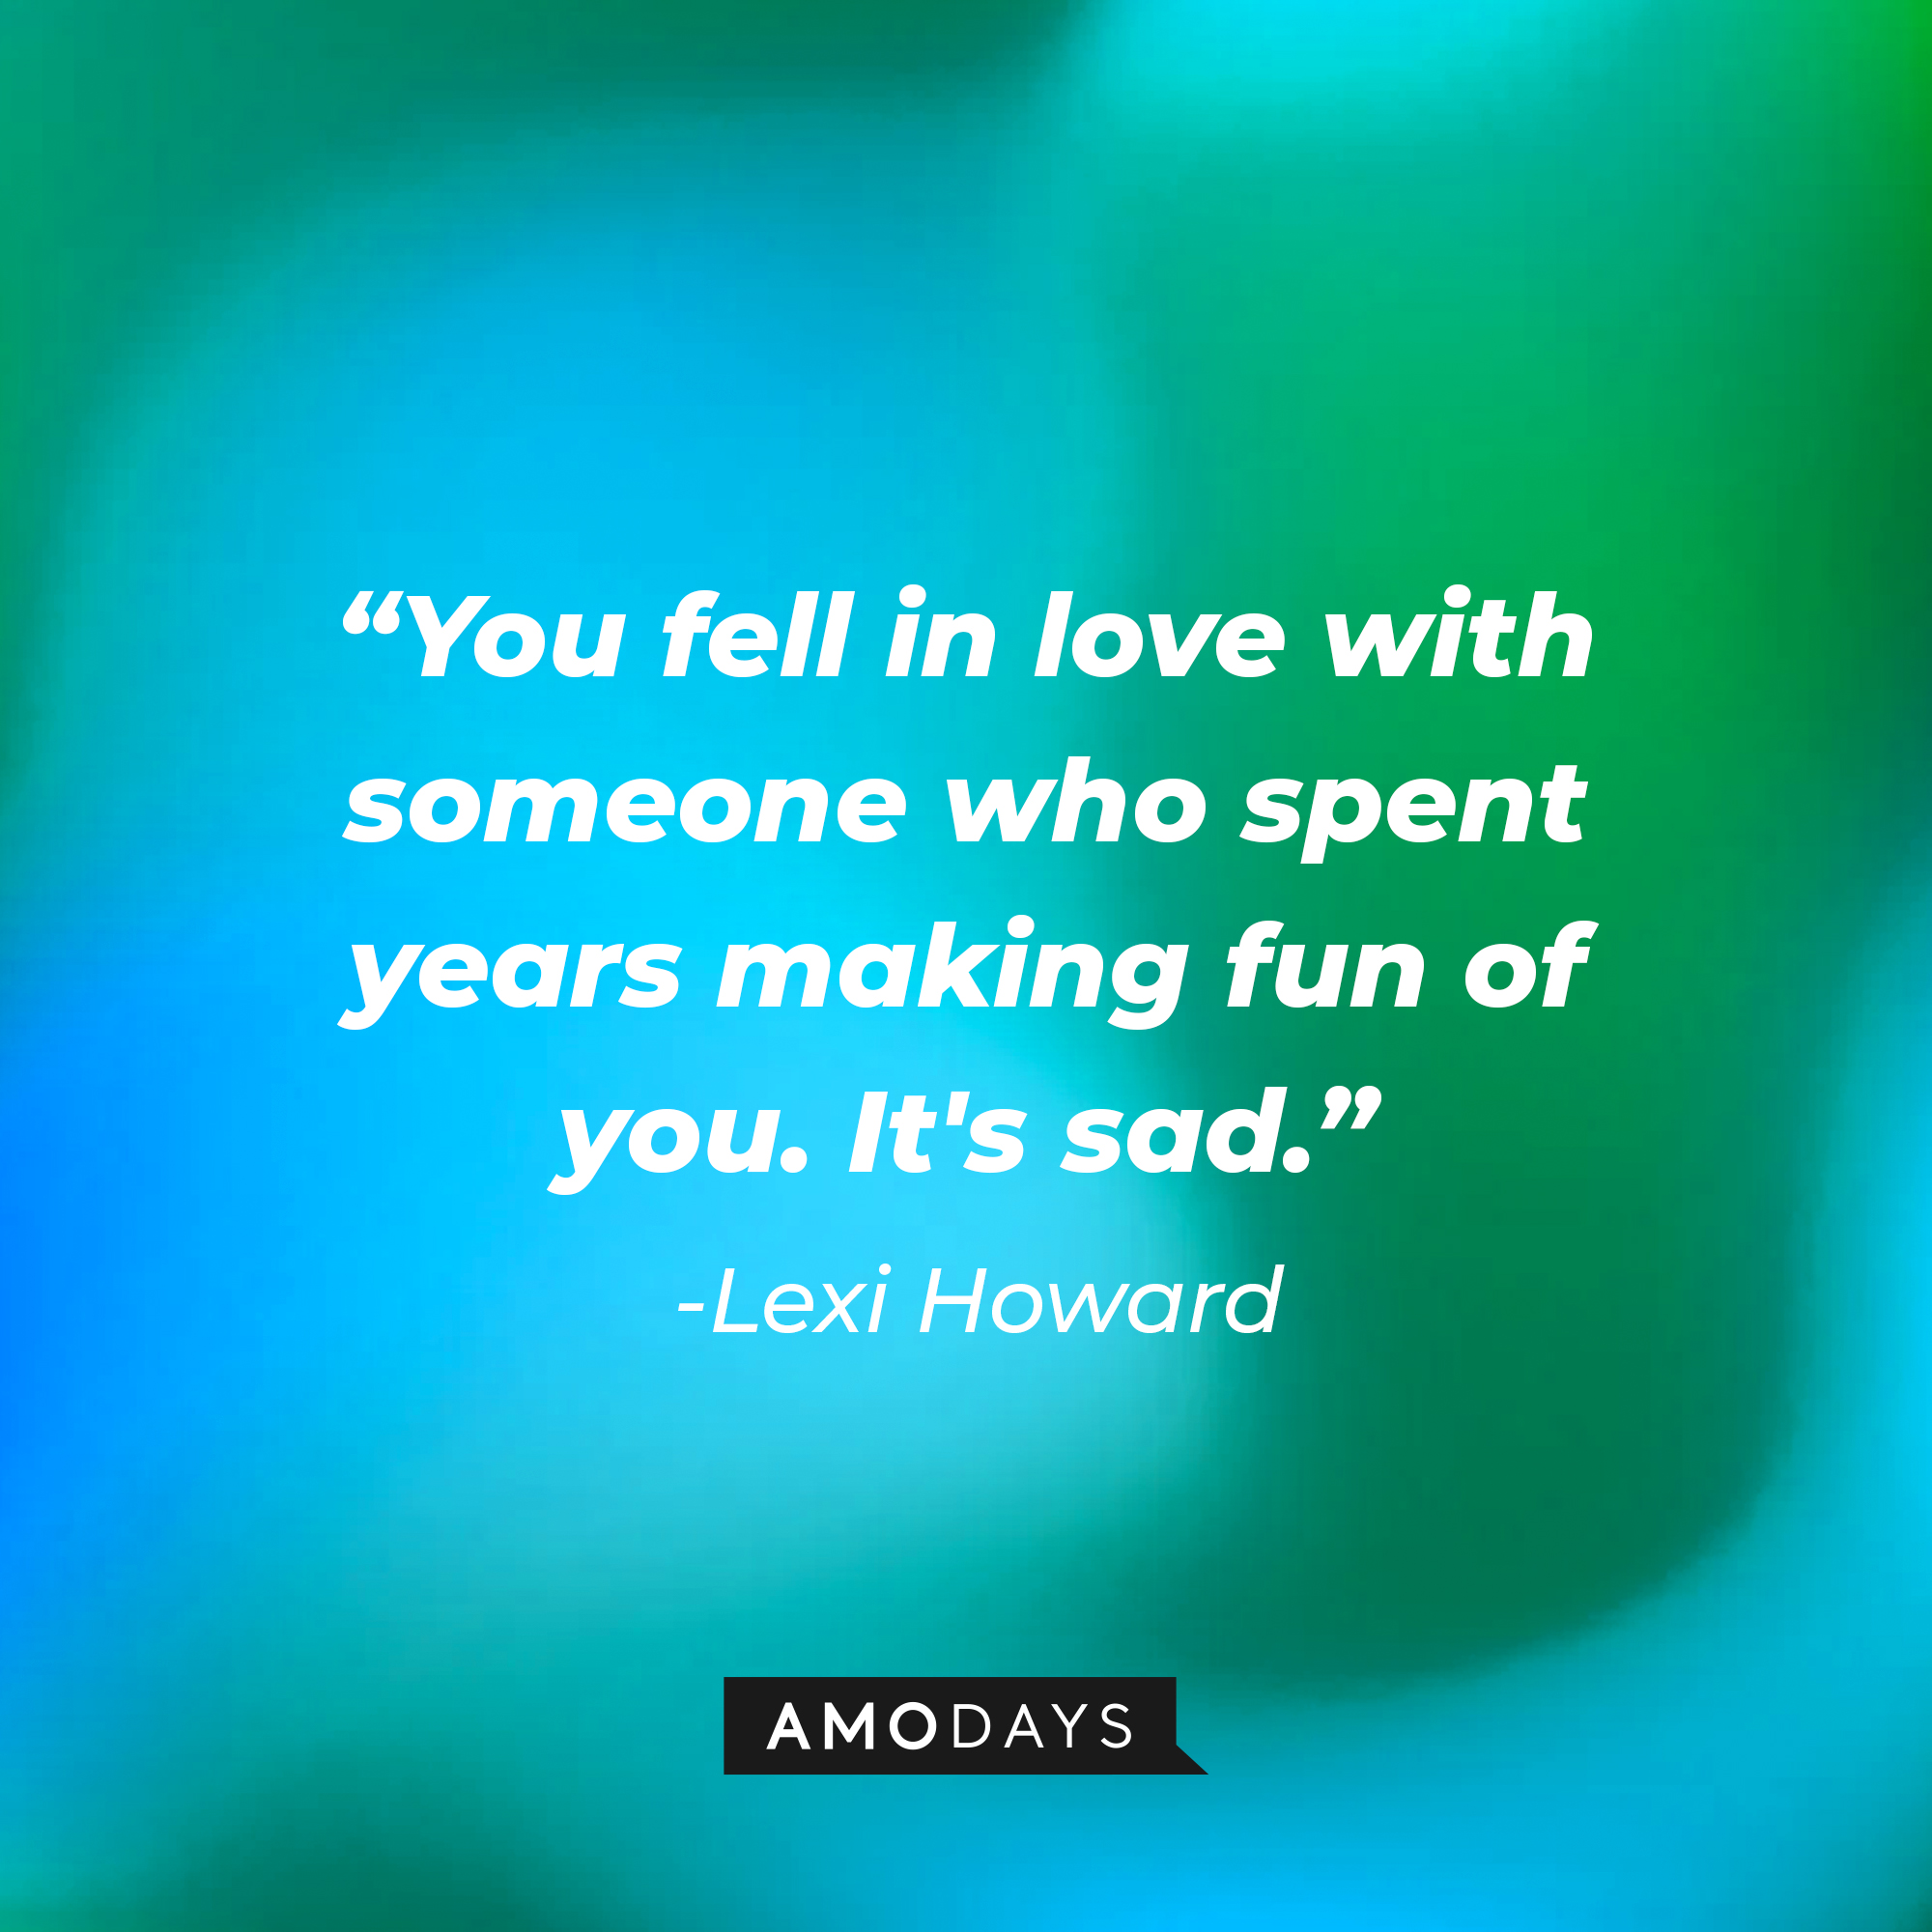 Lexi Howard’s quote:"You fell in love with someone who spent years making fun of you. It's sad." | Source: AmoDays